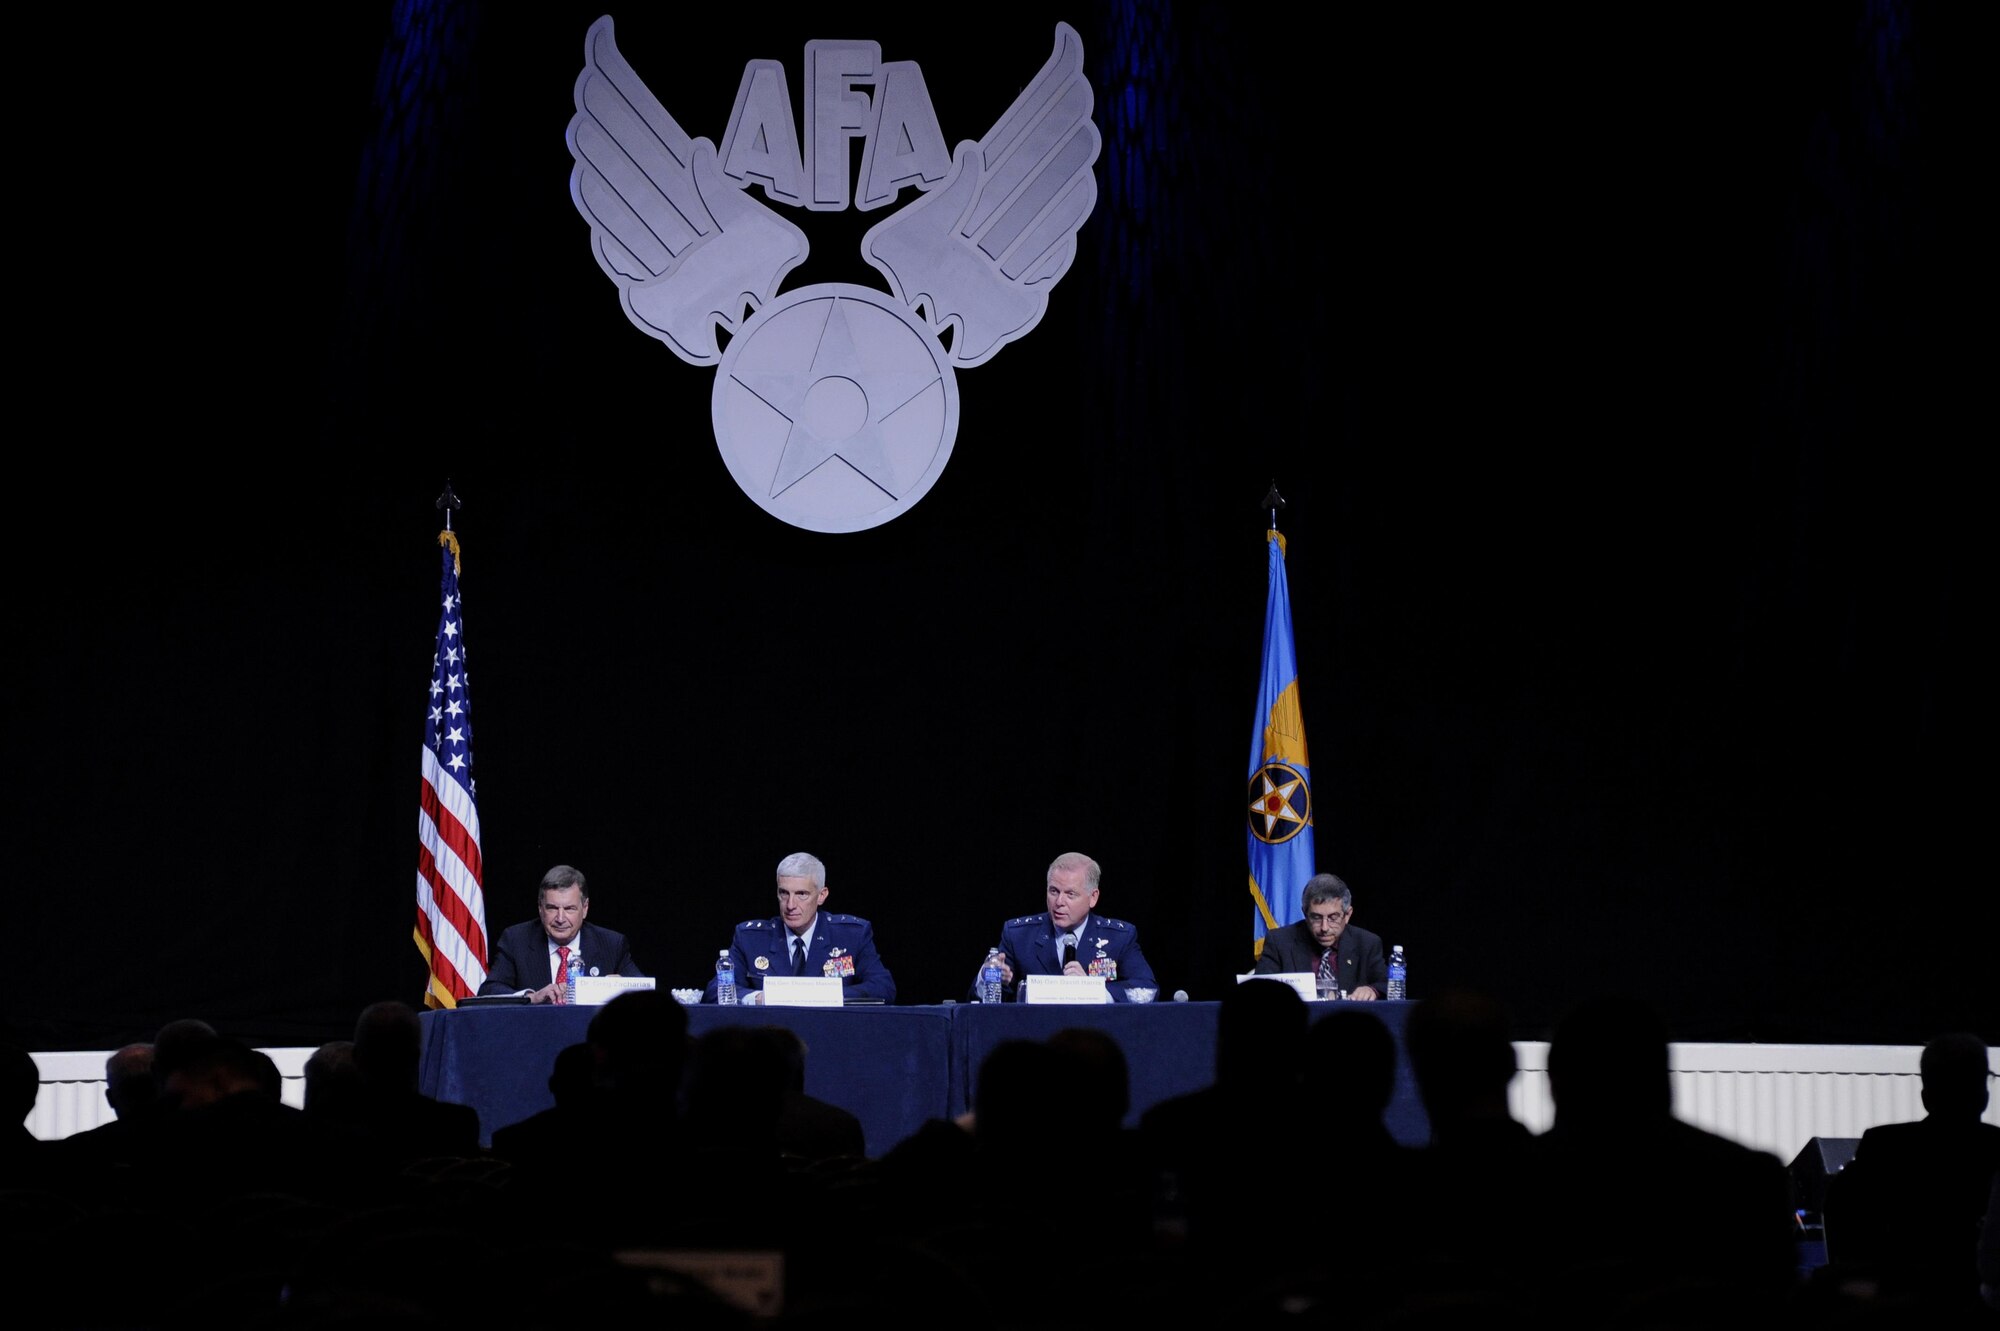 Air Force Research Lab Commander Maj. Gen. Thomas Masiello talks about focused innovation during the Air Force Association Air and Space Conference and Technology Exposition in Washington, D.C. Sept. 14, 2015. He was a member of the imperative for innovation in a time of austerity panel. (Air Force photo/Staff Sgt. Whitney Stanfield)